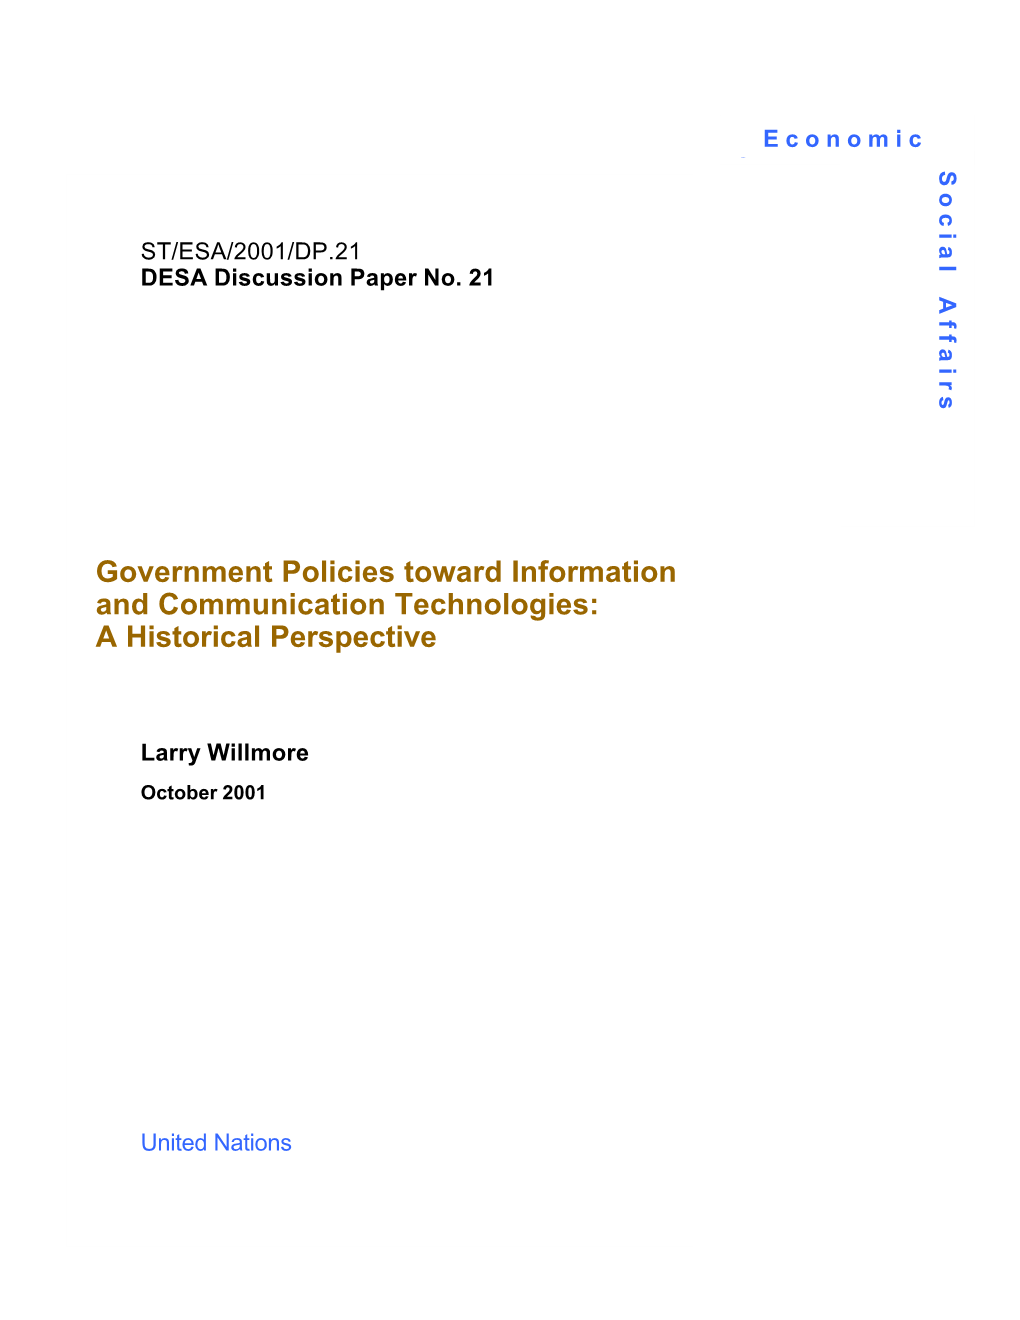 Government Policies Toward Information and Communication Technologies: a Historical Perspective